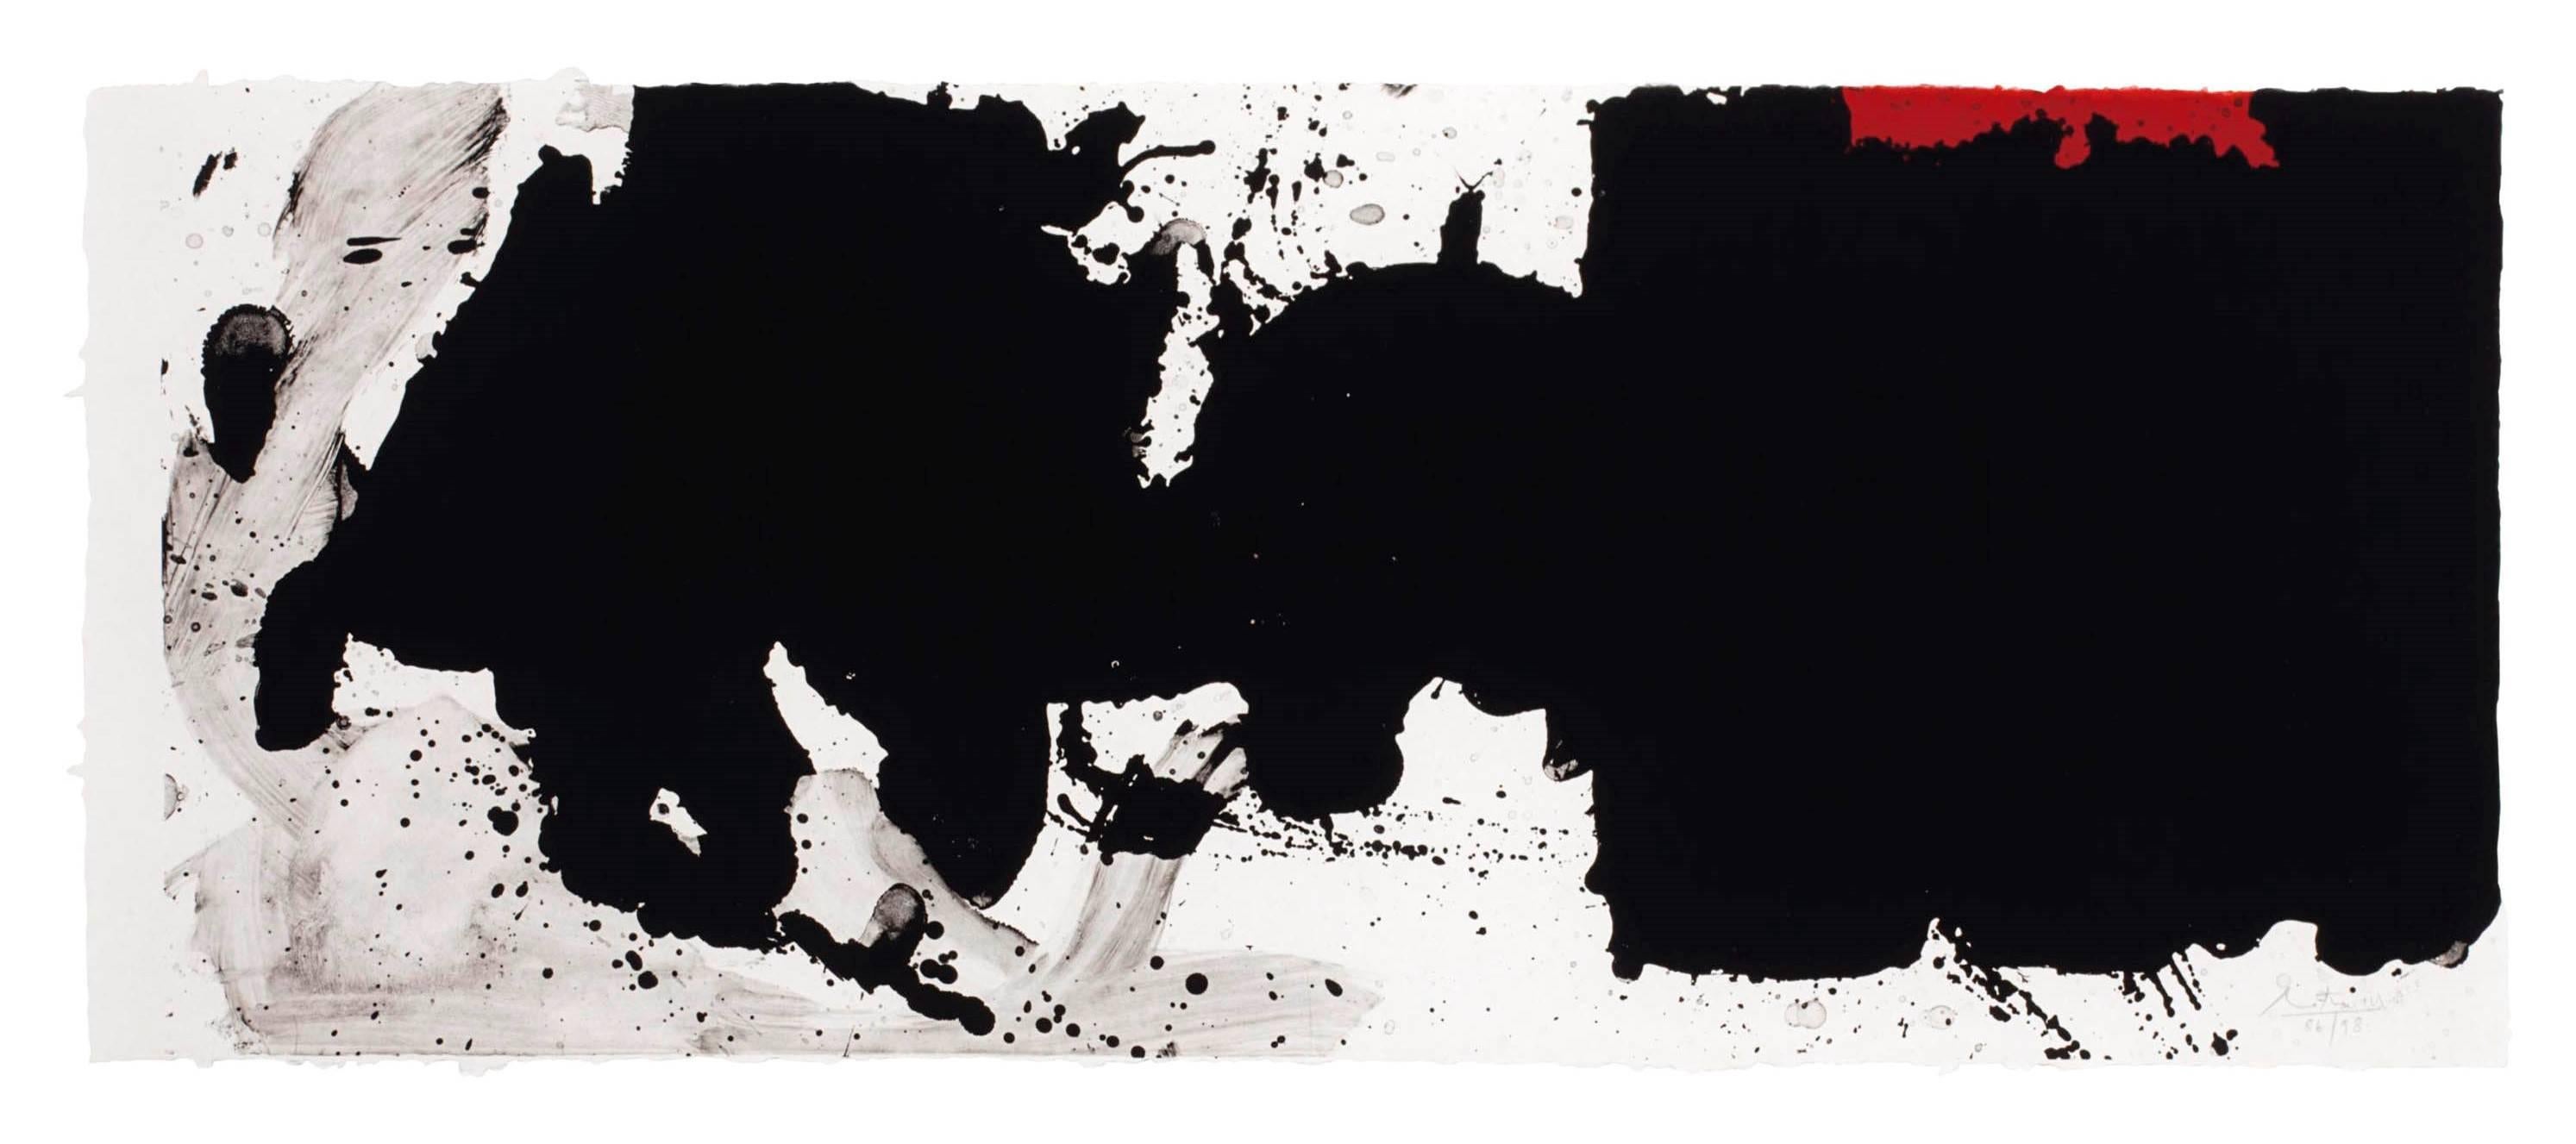 Black With No Way Out - Print by Robert Motherwell